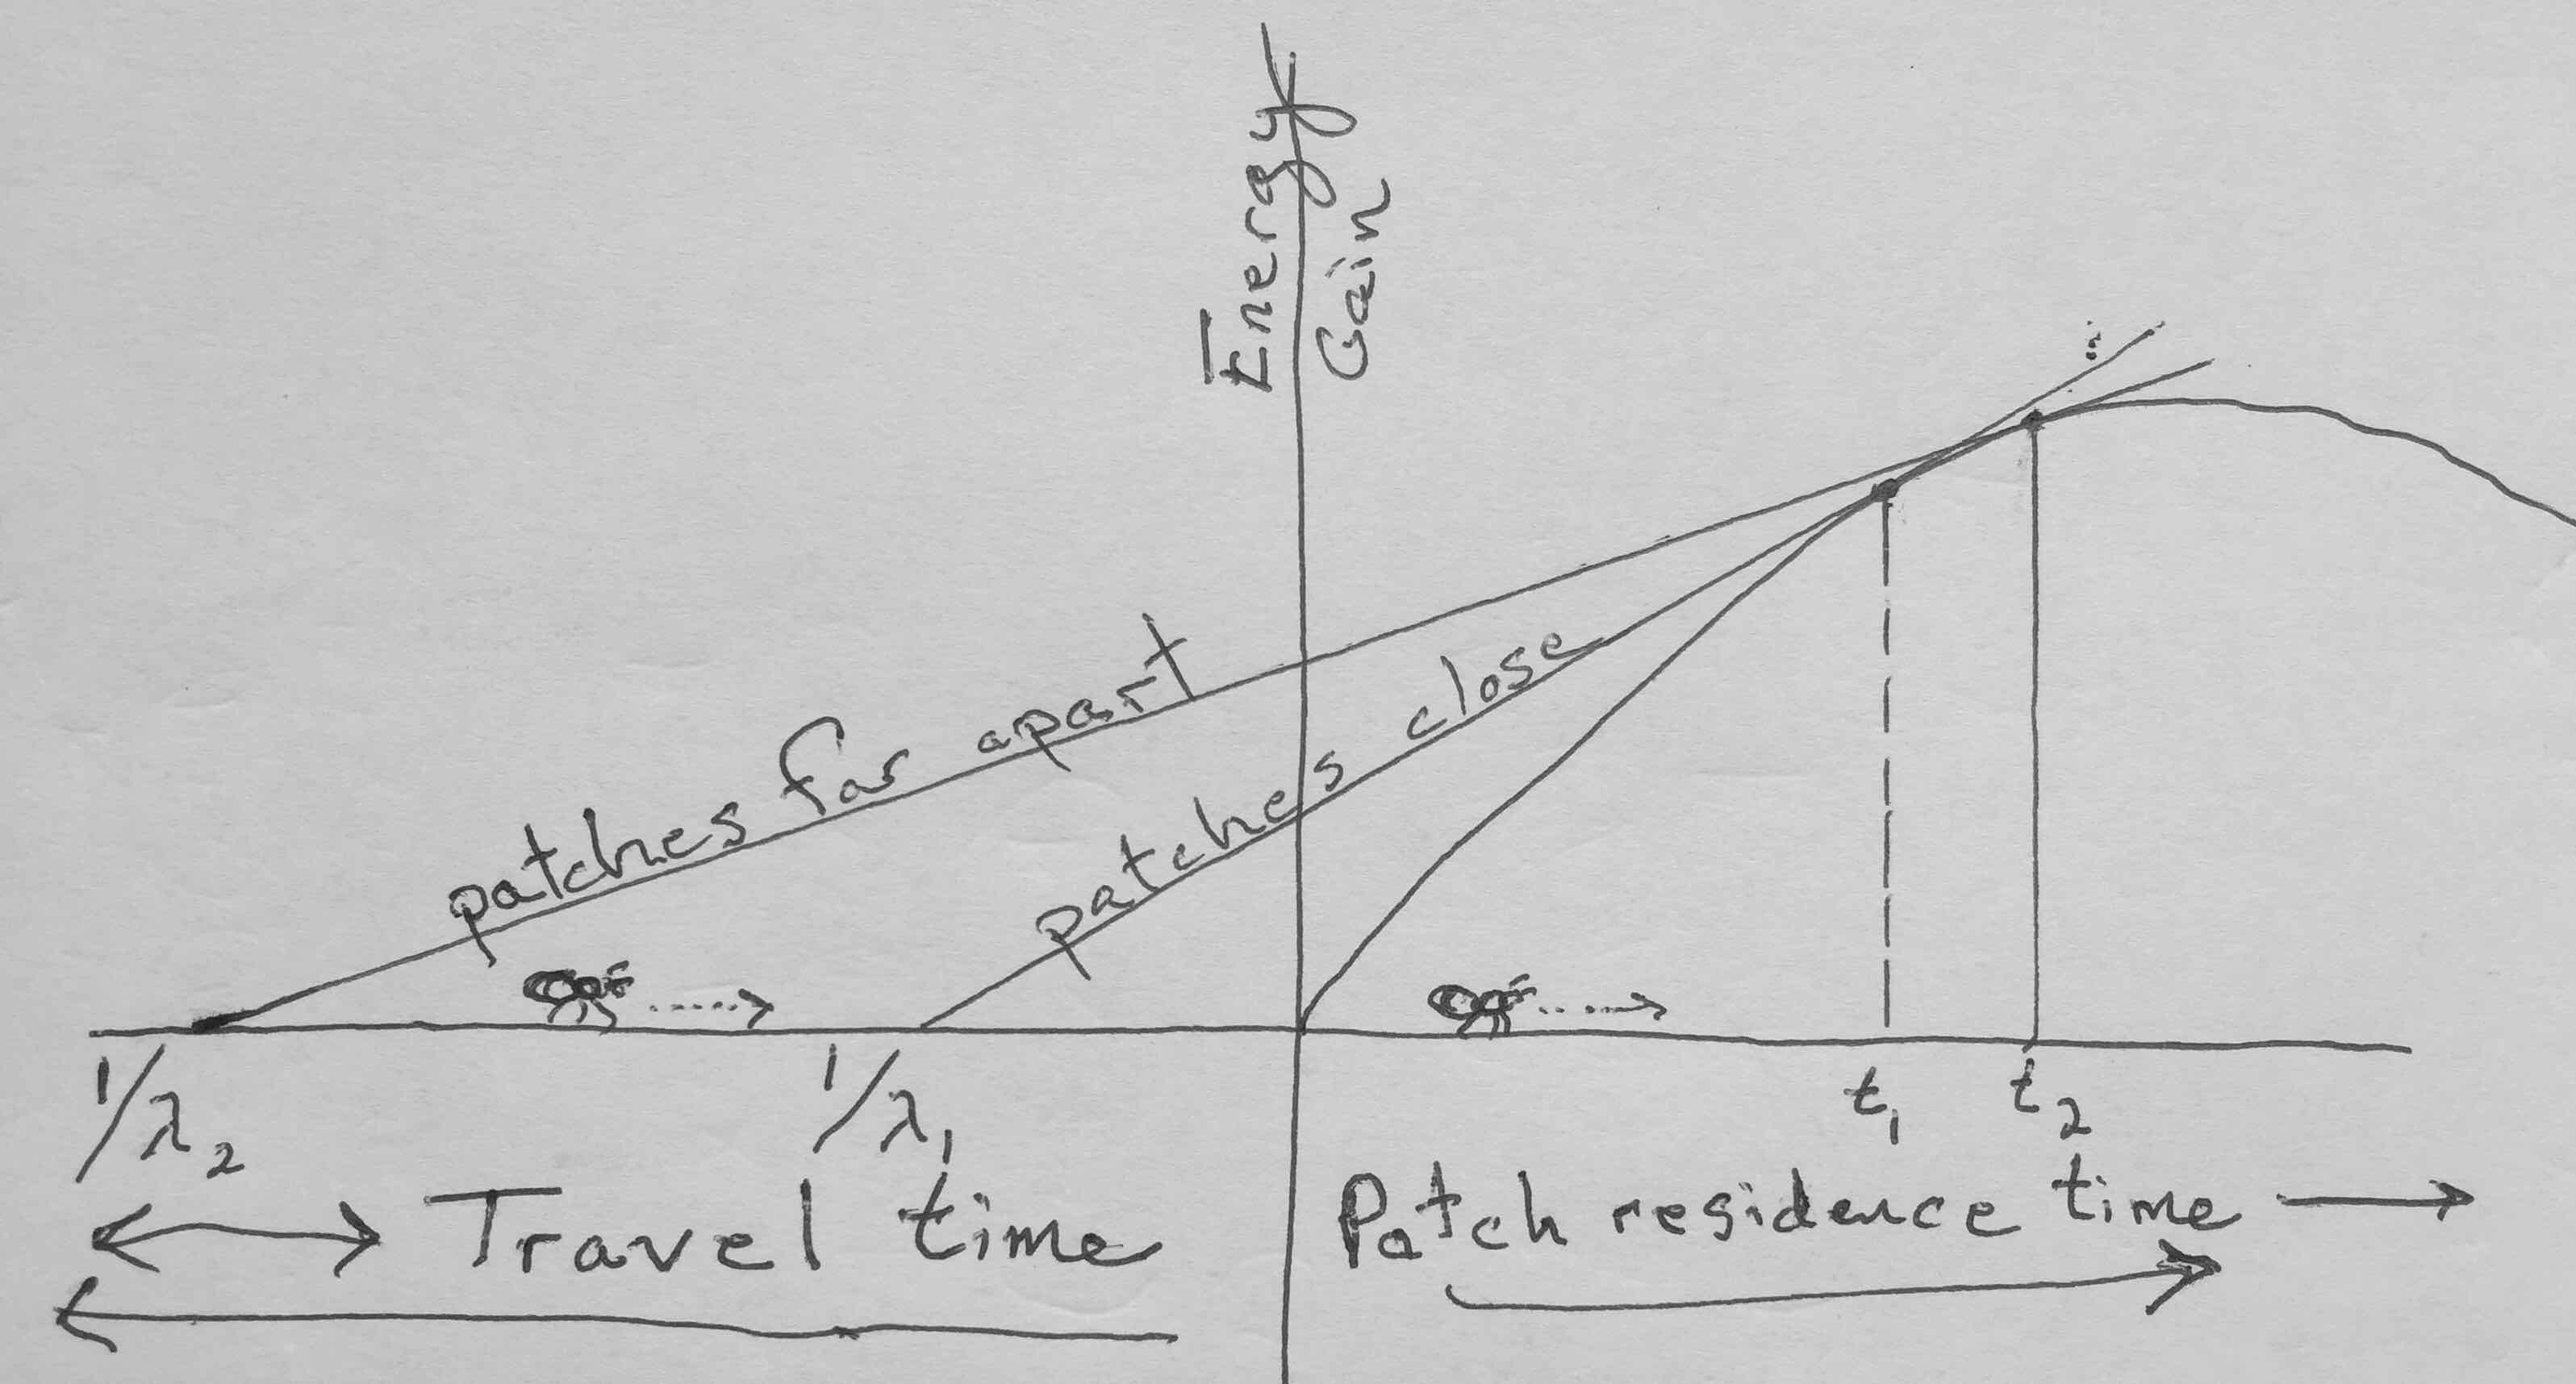 Energy gain vs. time: The origin is when the forager enters the patch; to the left is time spent traveling from one patch to the next, and to the right is time spent in the patch. The graph represents two different habitats, one in which the patches are easy to get to (habitat 1), and another where it takes more time to get from patch to patch (habitat 2). In all cases, the patches are identical, having the same gain function. The curved line is the gain function, the net energy gain as a function of time spent in the patch. The slope of that curve is the derivative of the gain function. Its slope at any single time point is the instantaneous rate of gain. The two straight lines are the expected gains averaged over time for each habitat as a whole. Lambda is the rate at which a forager randomly encounters patches - because it is a Poisson process, the mean or expected time is 1/lambda. The forager should leave the patch when the instantaneous rate of gain in the patch equals the long term average rate of gain for the habitat as a whole.